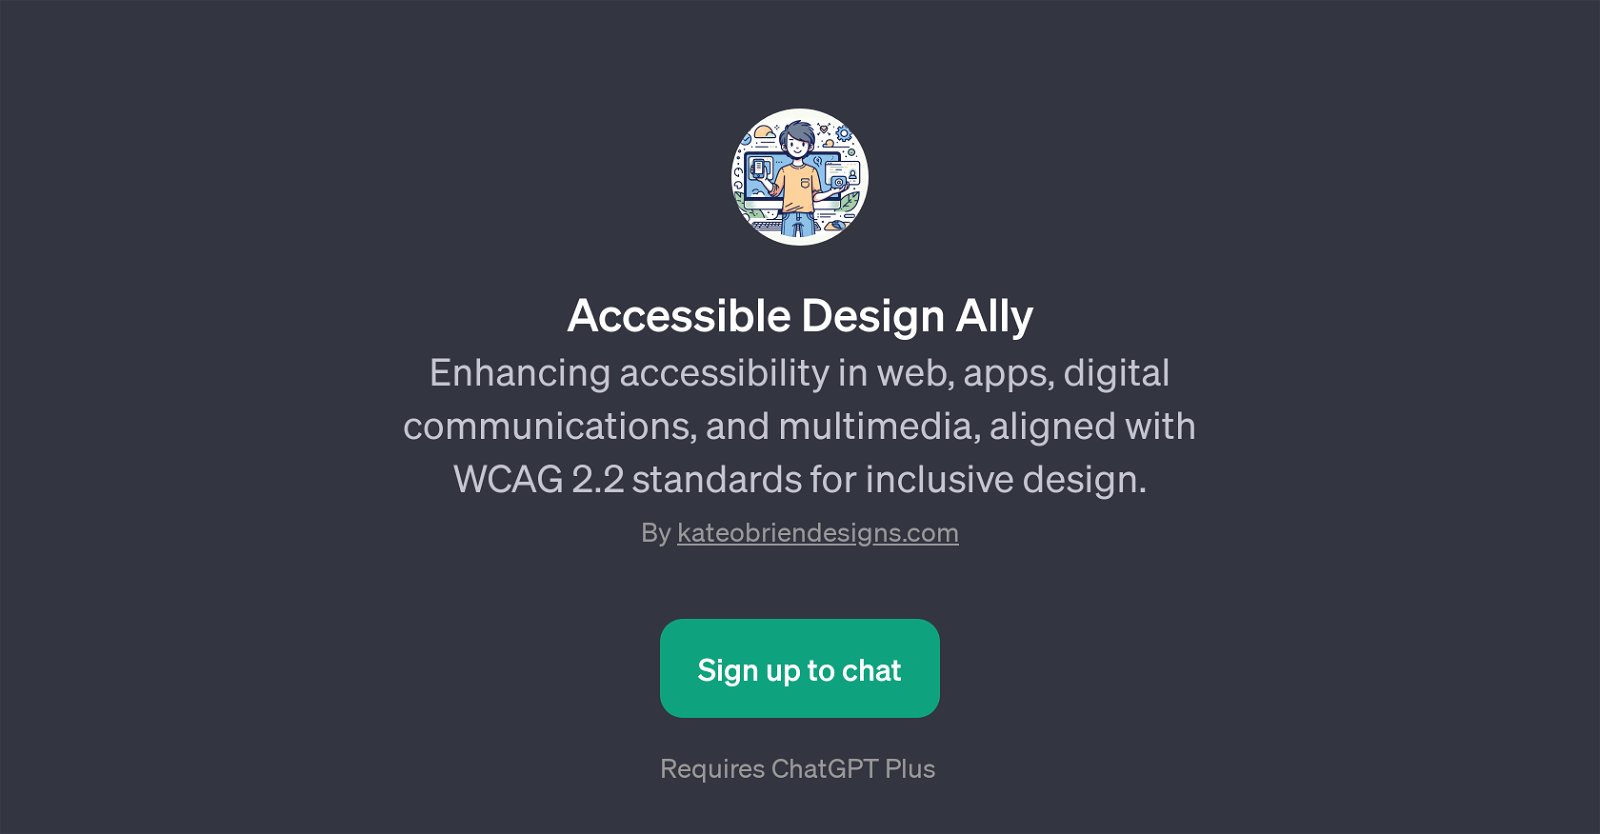 Accessible Design Ally website